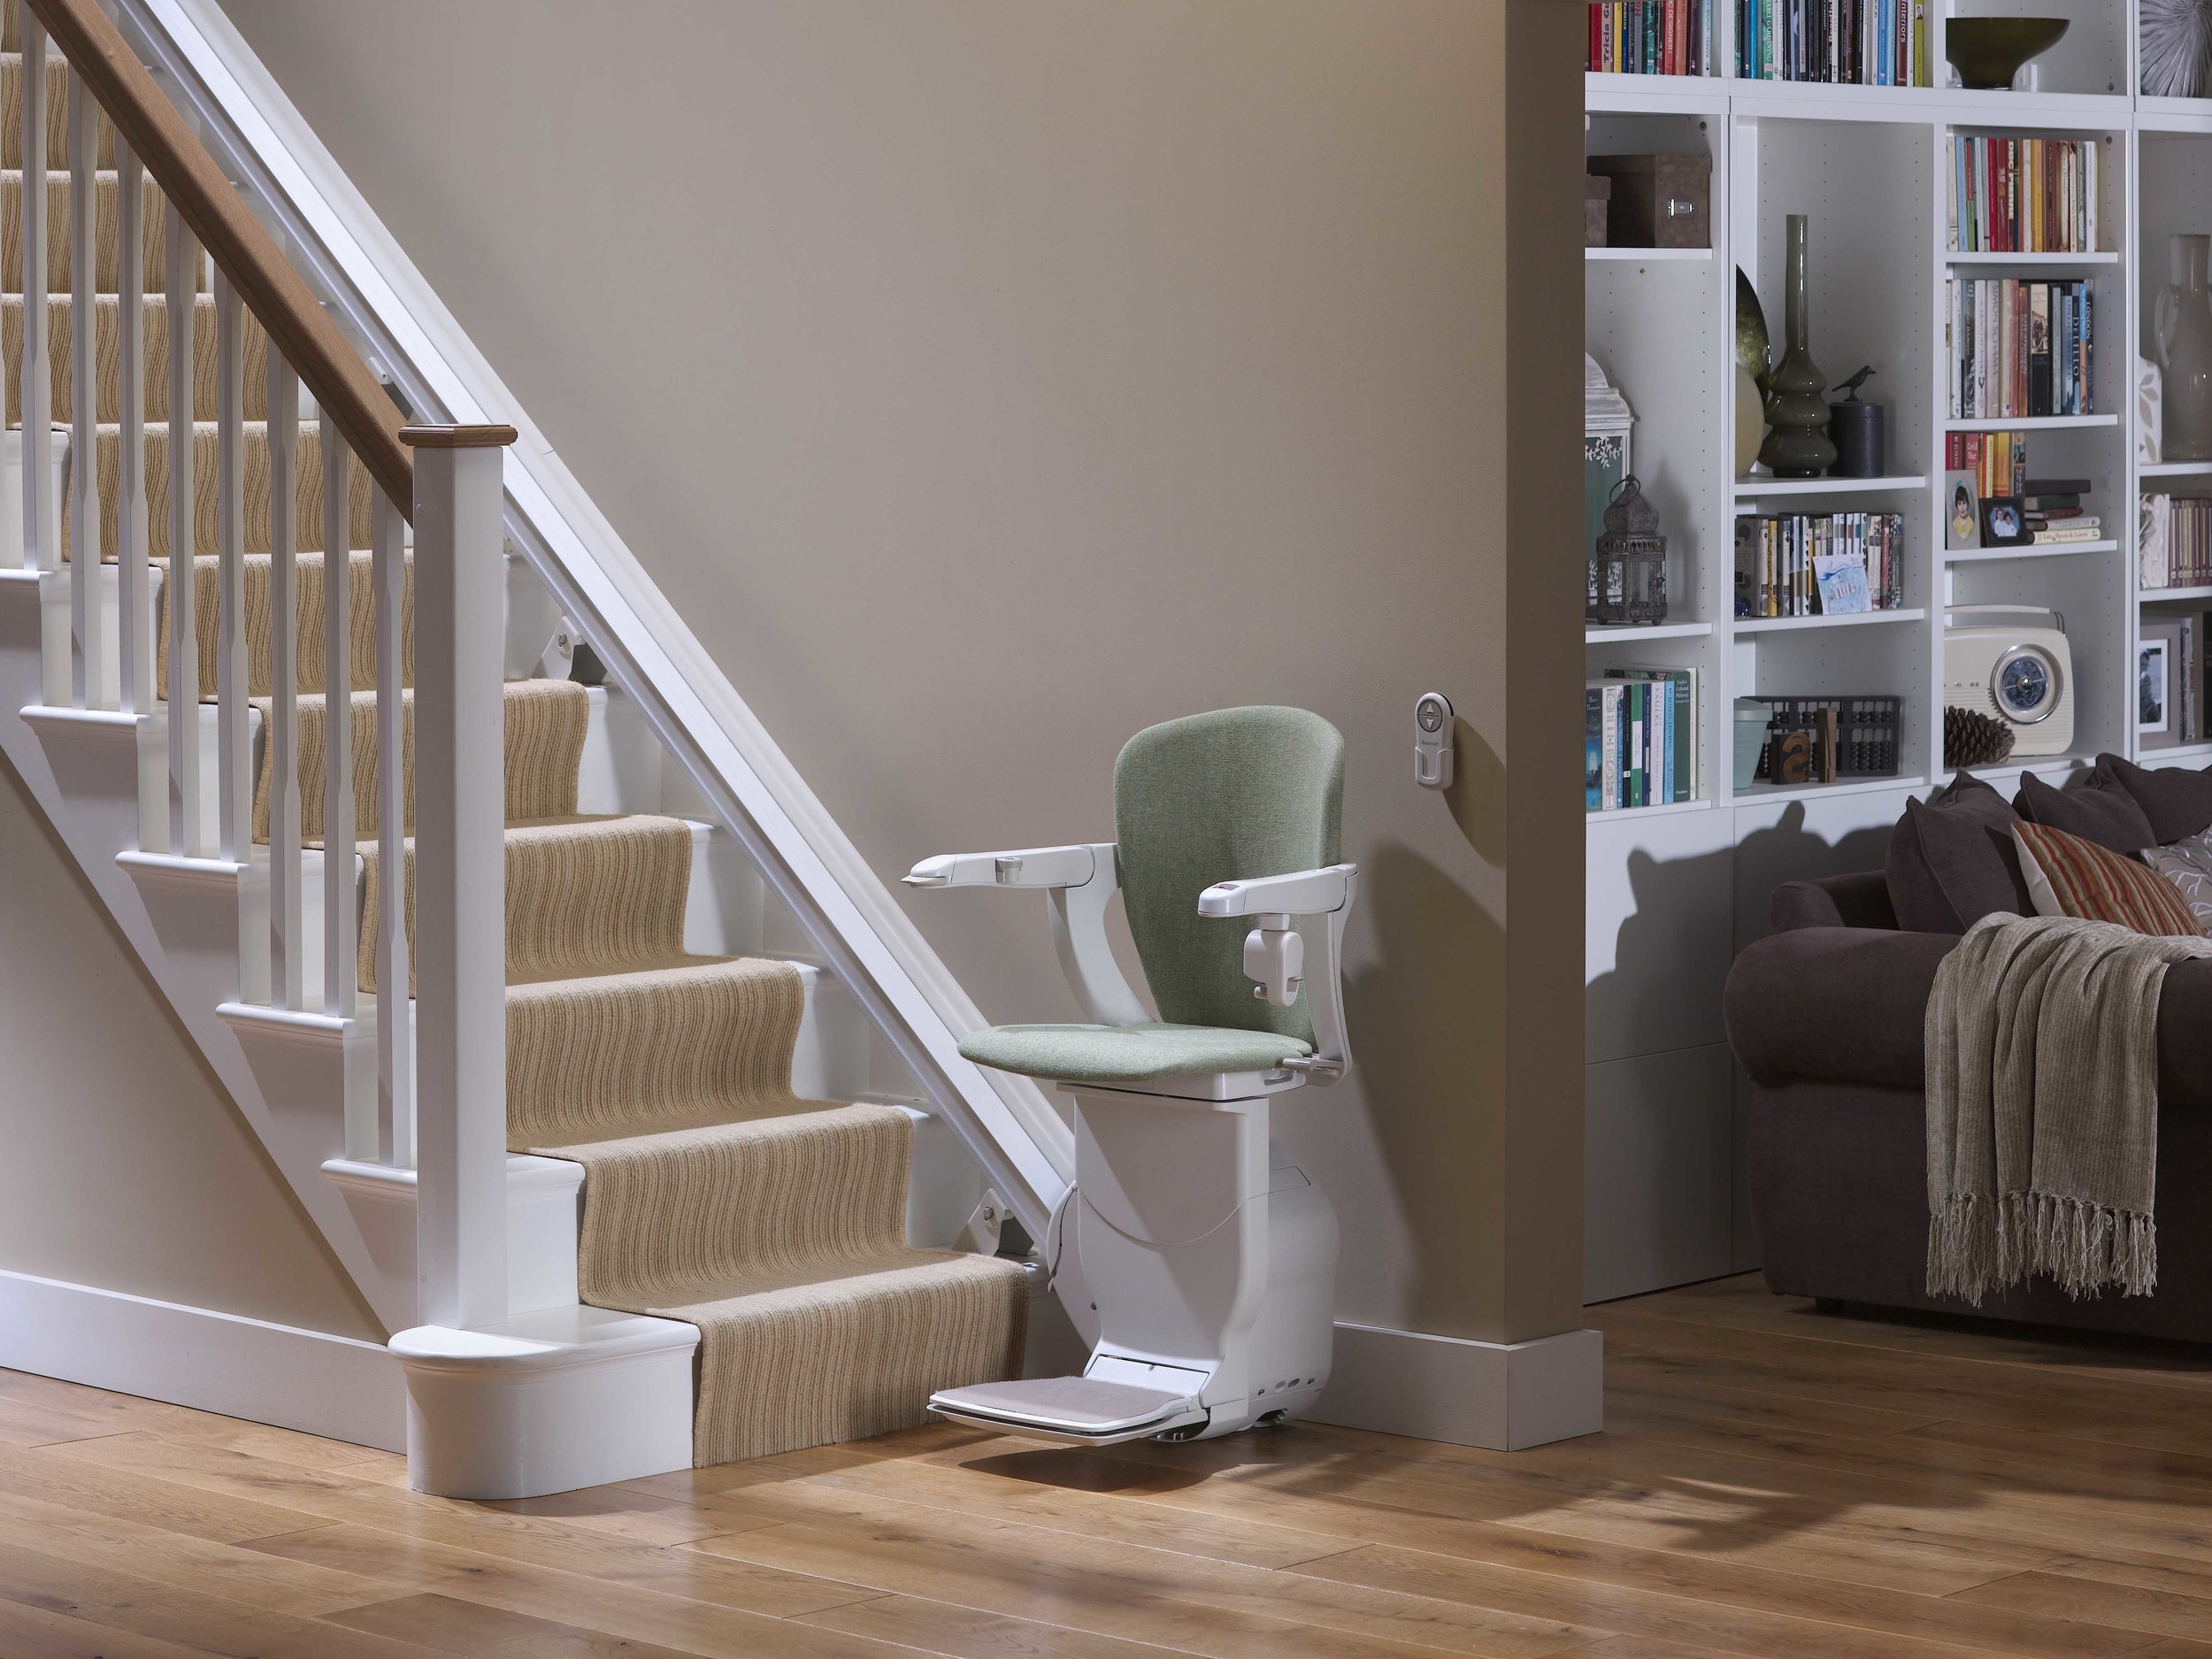 stannah-600-starla-stairlift-unfolded-downstairs.jpg